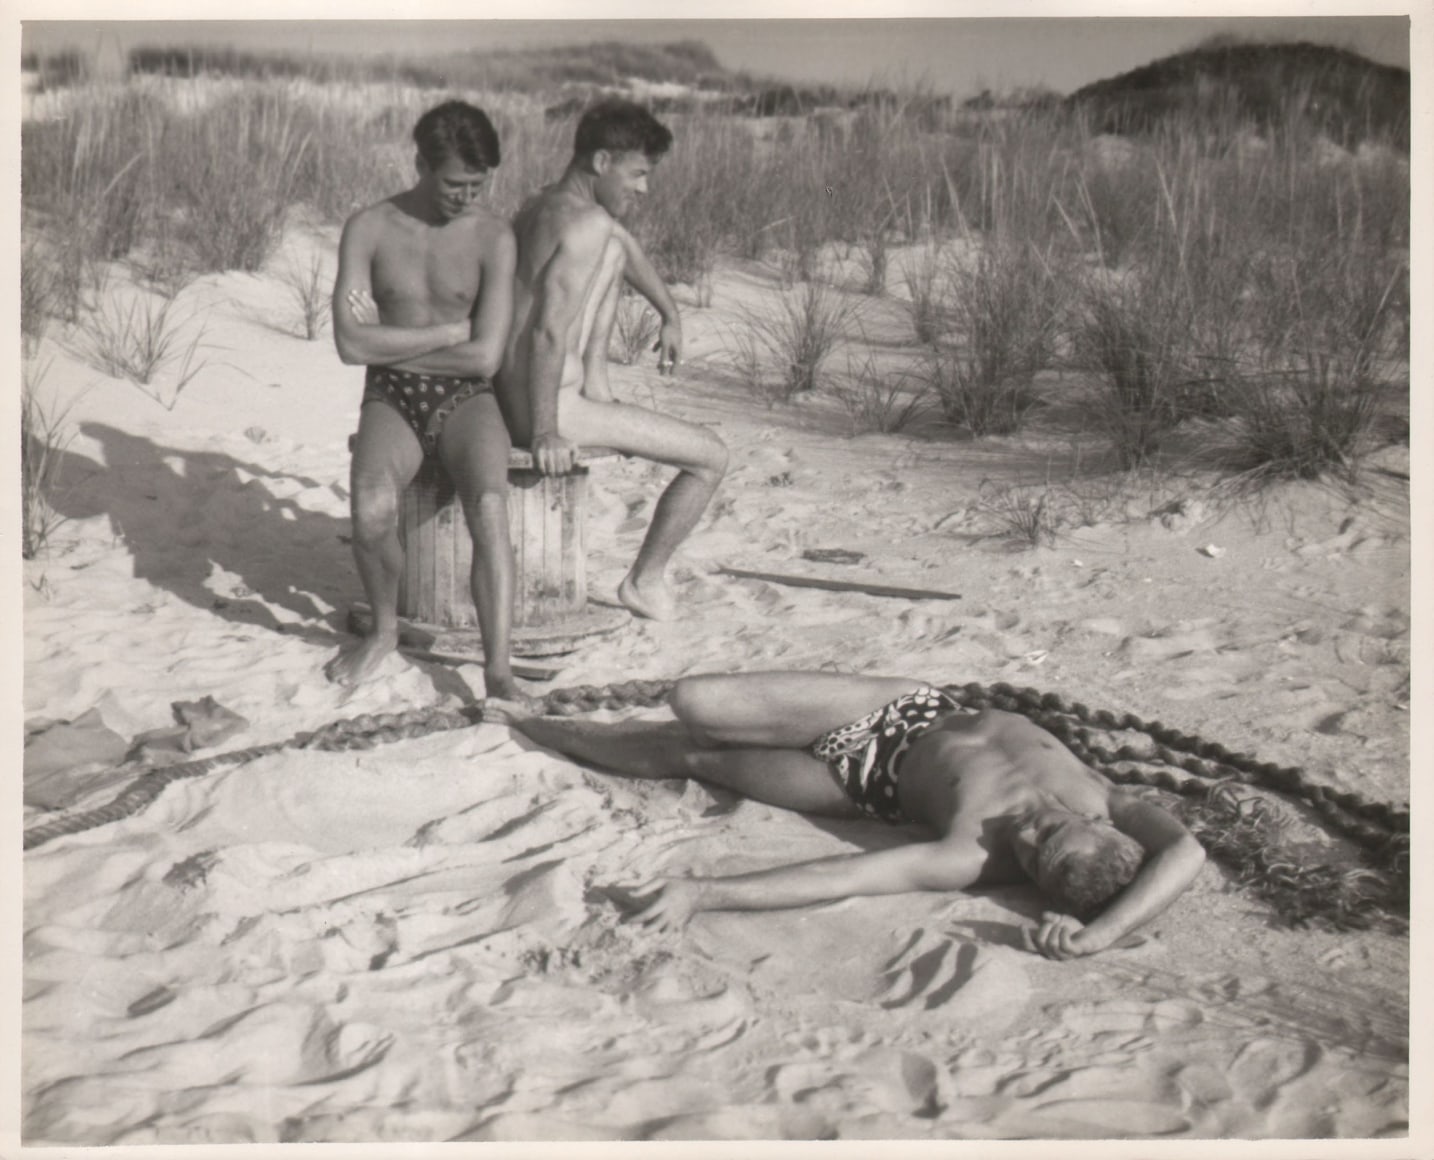 PaJaMa, Glenway Wescott, Paul Cadmus, George Platt Lynes, c. 1941. Two men sit on the beach on a large wooden spool (left), a third man lays in the sand, curving his body alongside a thick rope.